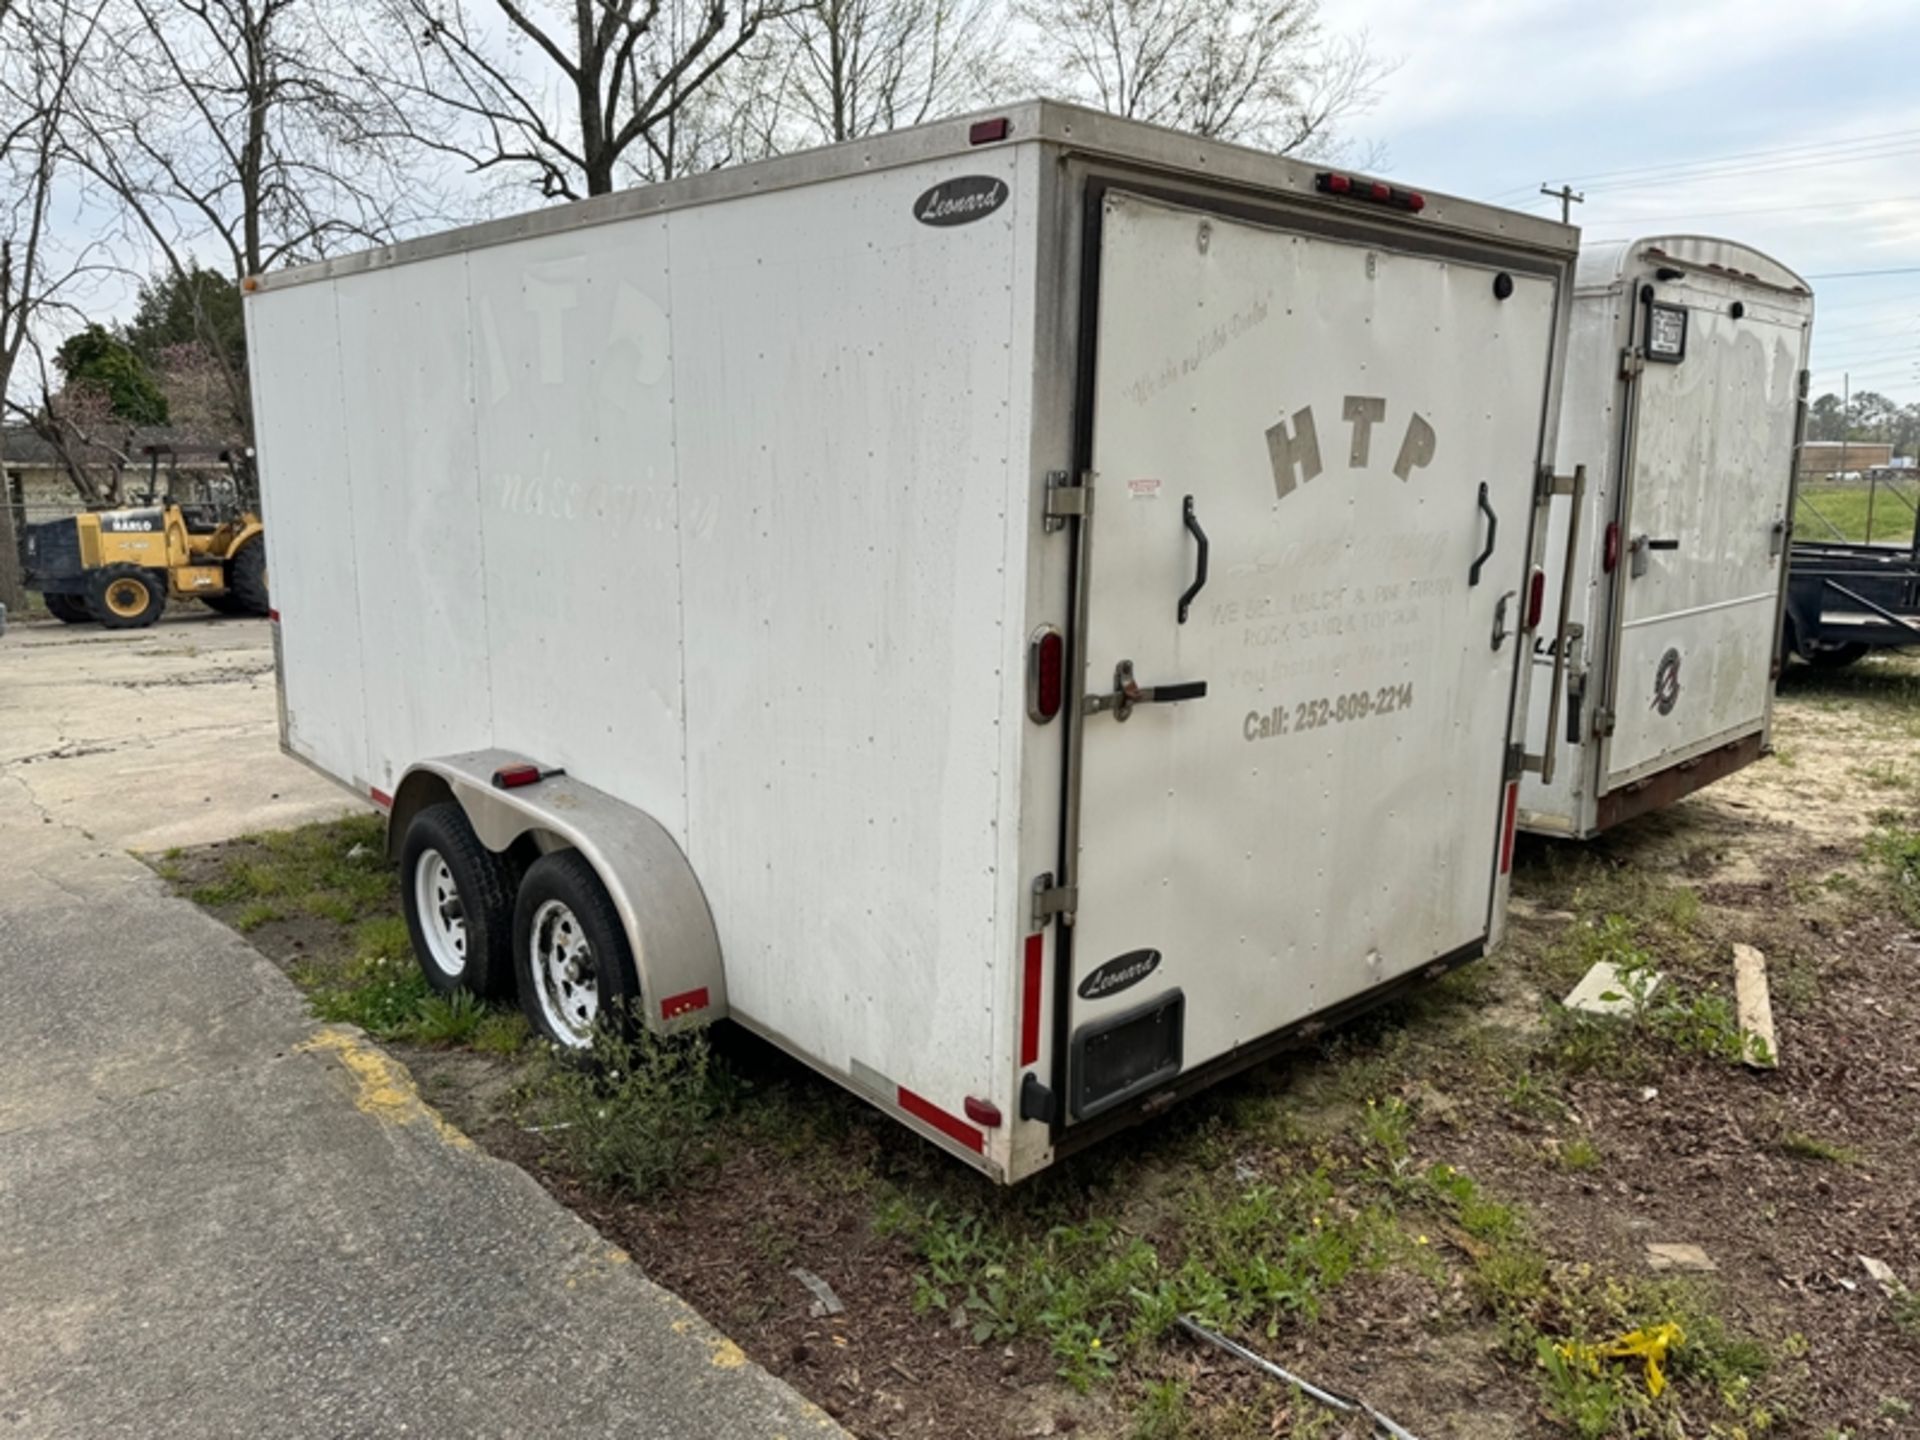 2015 ARISING INDUSTRIES 7'x16' v-nose enclosed trailer - 5YCBE162XFH021727 - Image 4 of 5